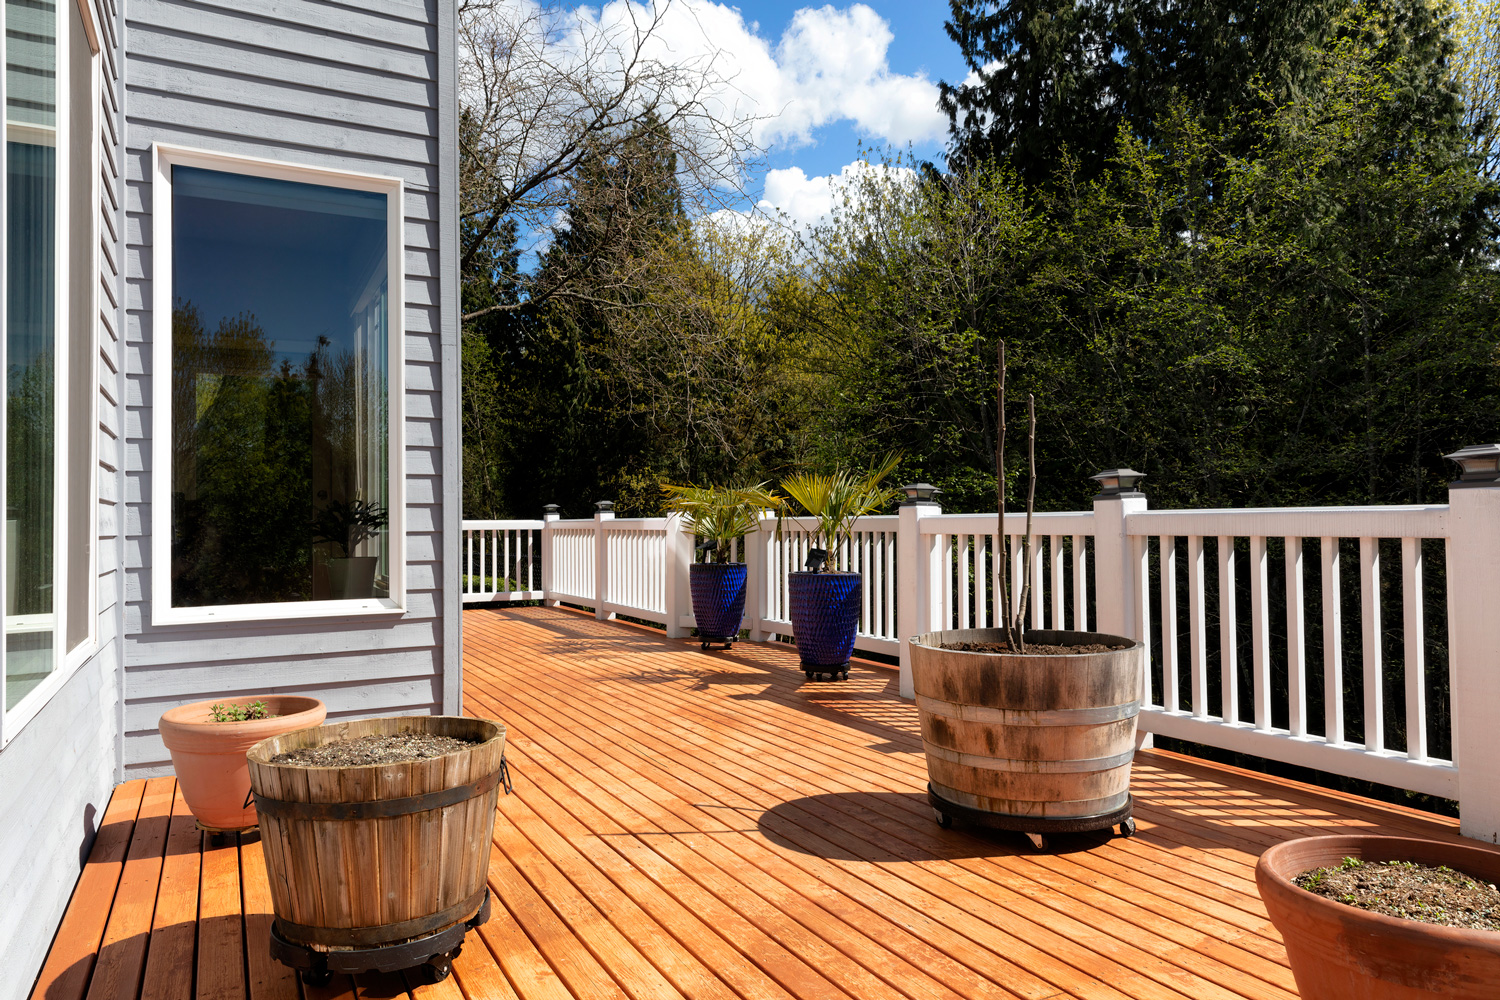 Home outdoor cedar wood backyard deck just freshly stained during early spring time with trees and sky in background